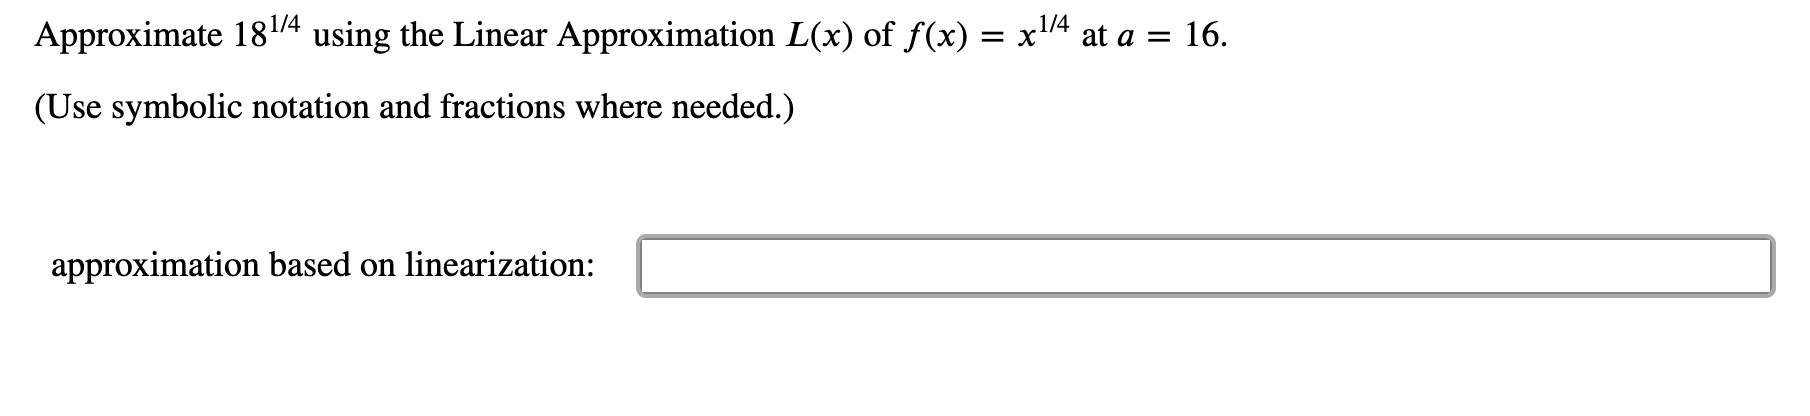 Approximate 184 using the Linear Approximation L(x) of f(x) = x'
at a = 16.
(Use symbolic notation and fractions where needed.)
approximation based on linearization:
